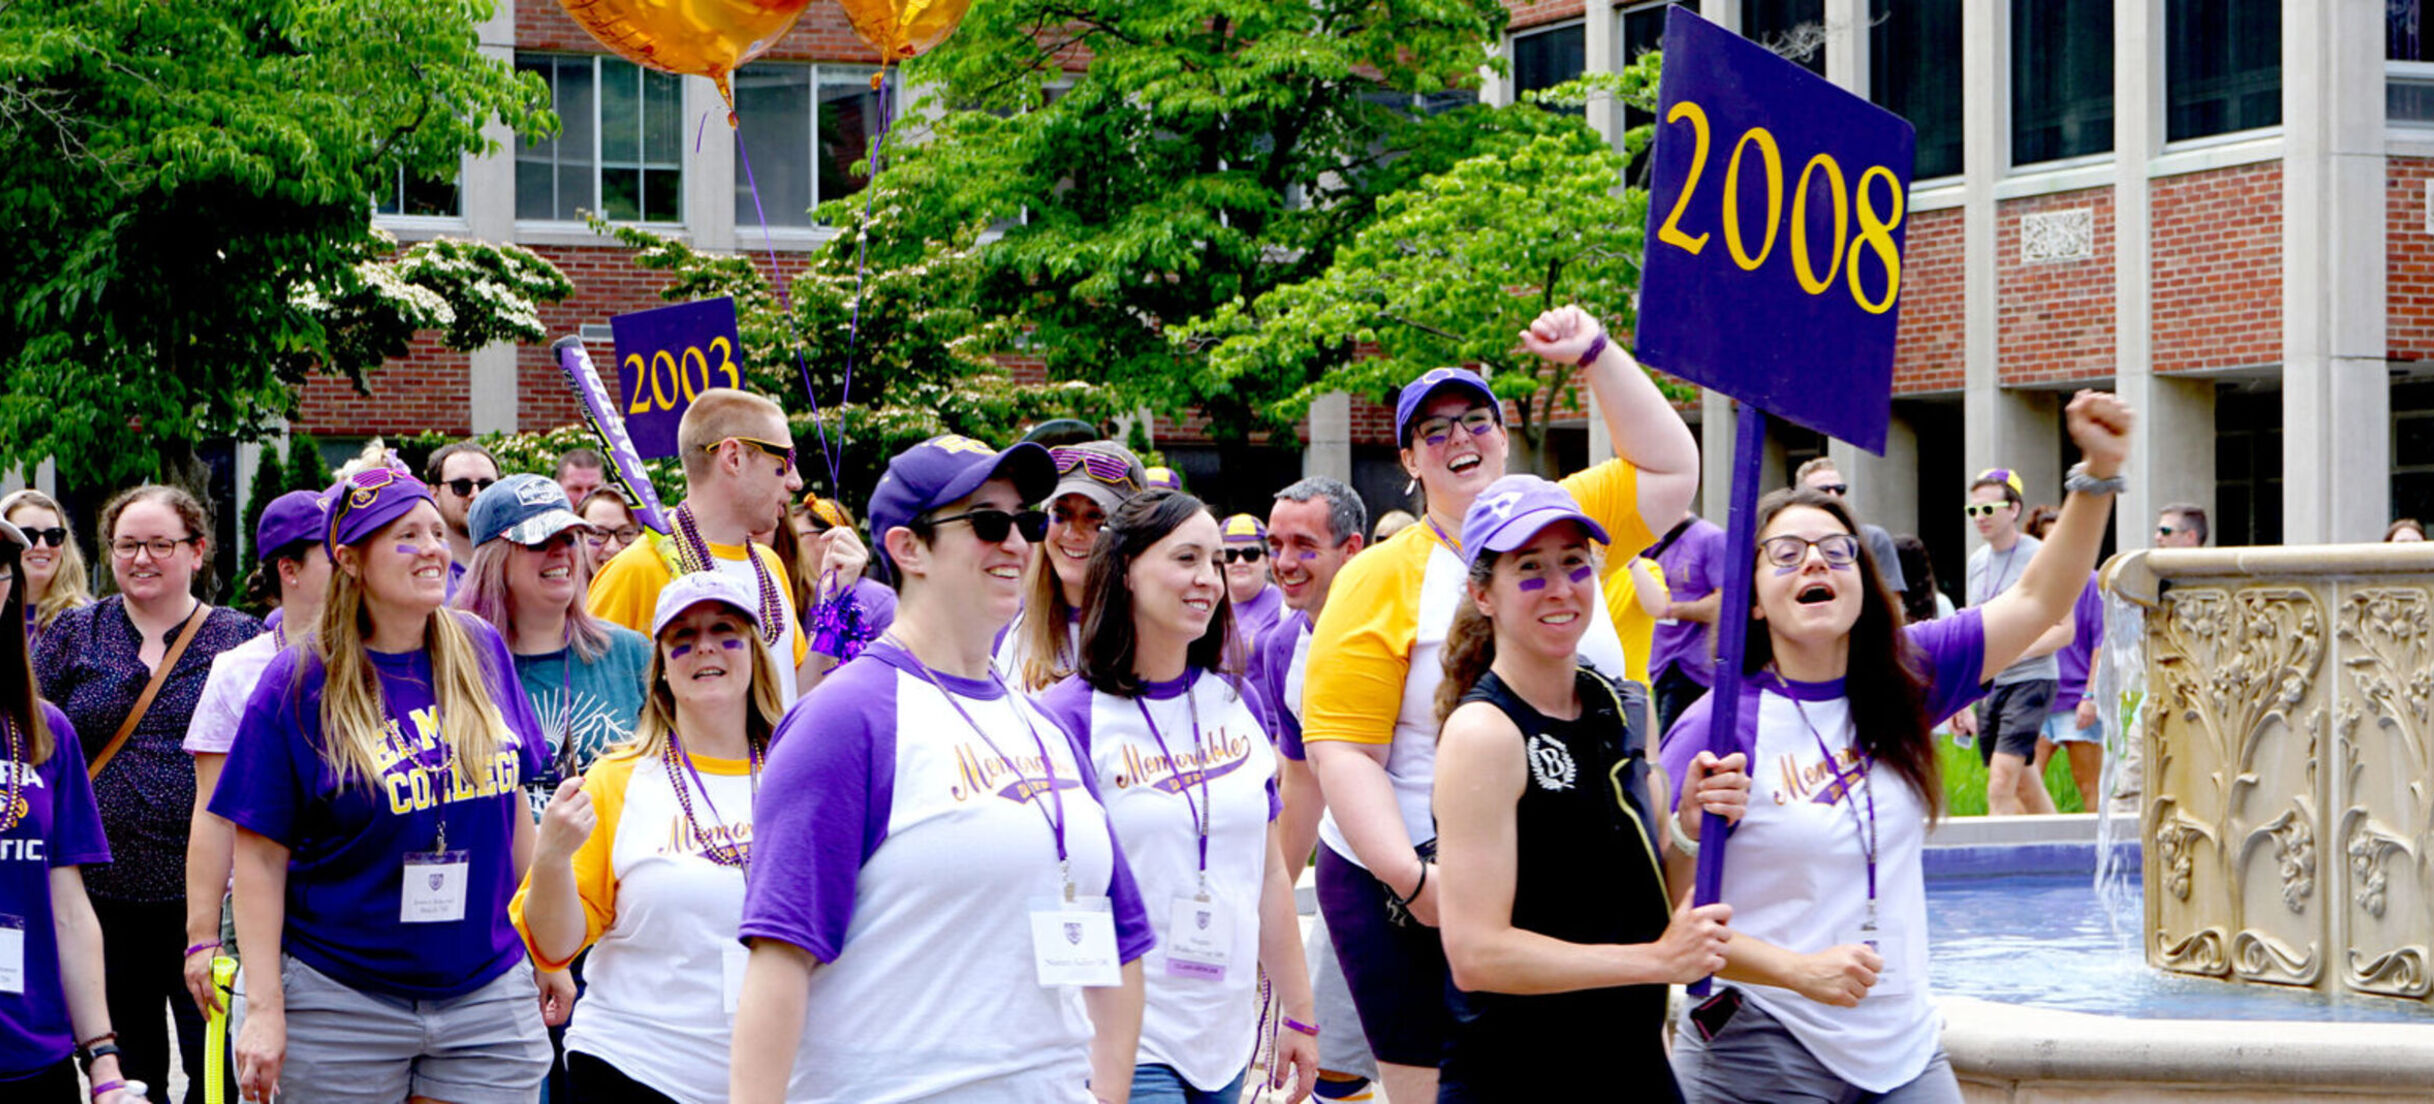 Members of the Class of 2008 cheer as they march in the Reunion 2023 parade